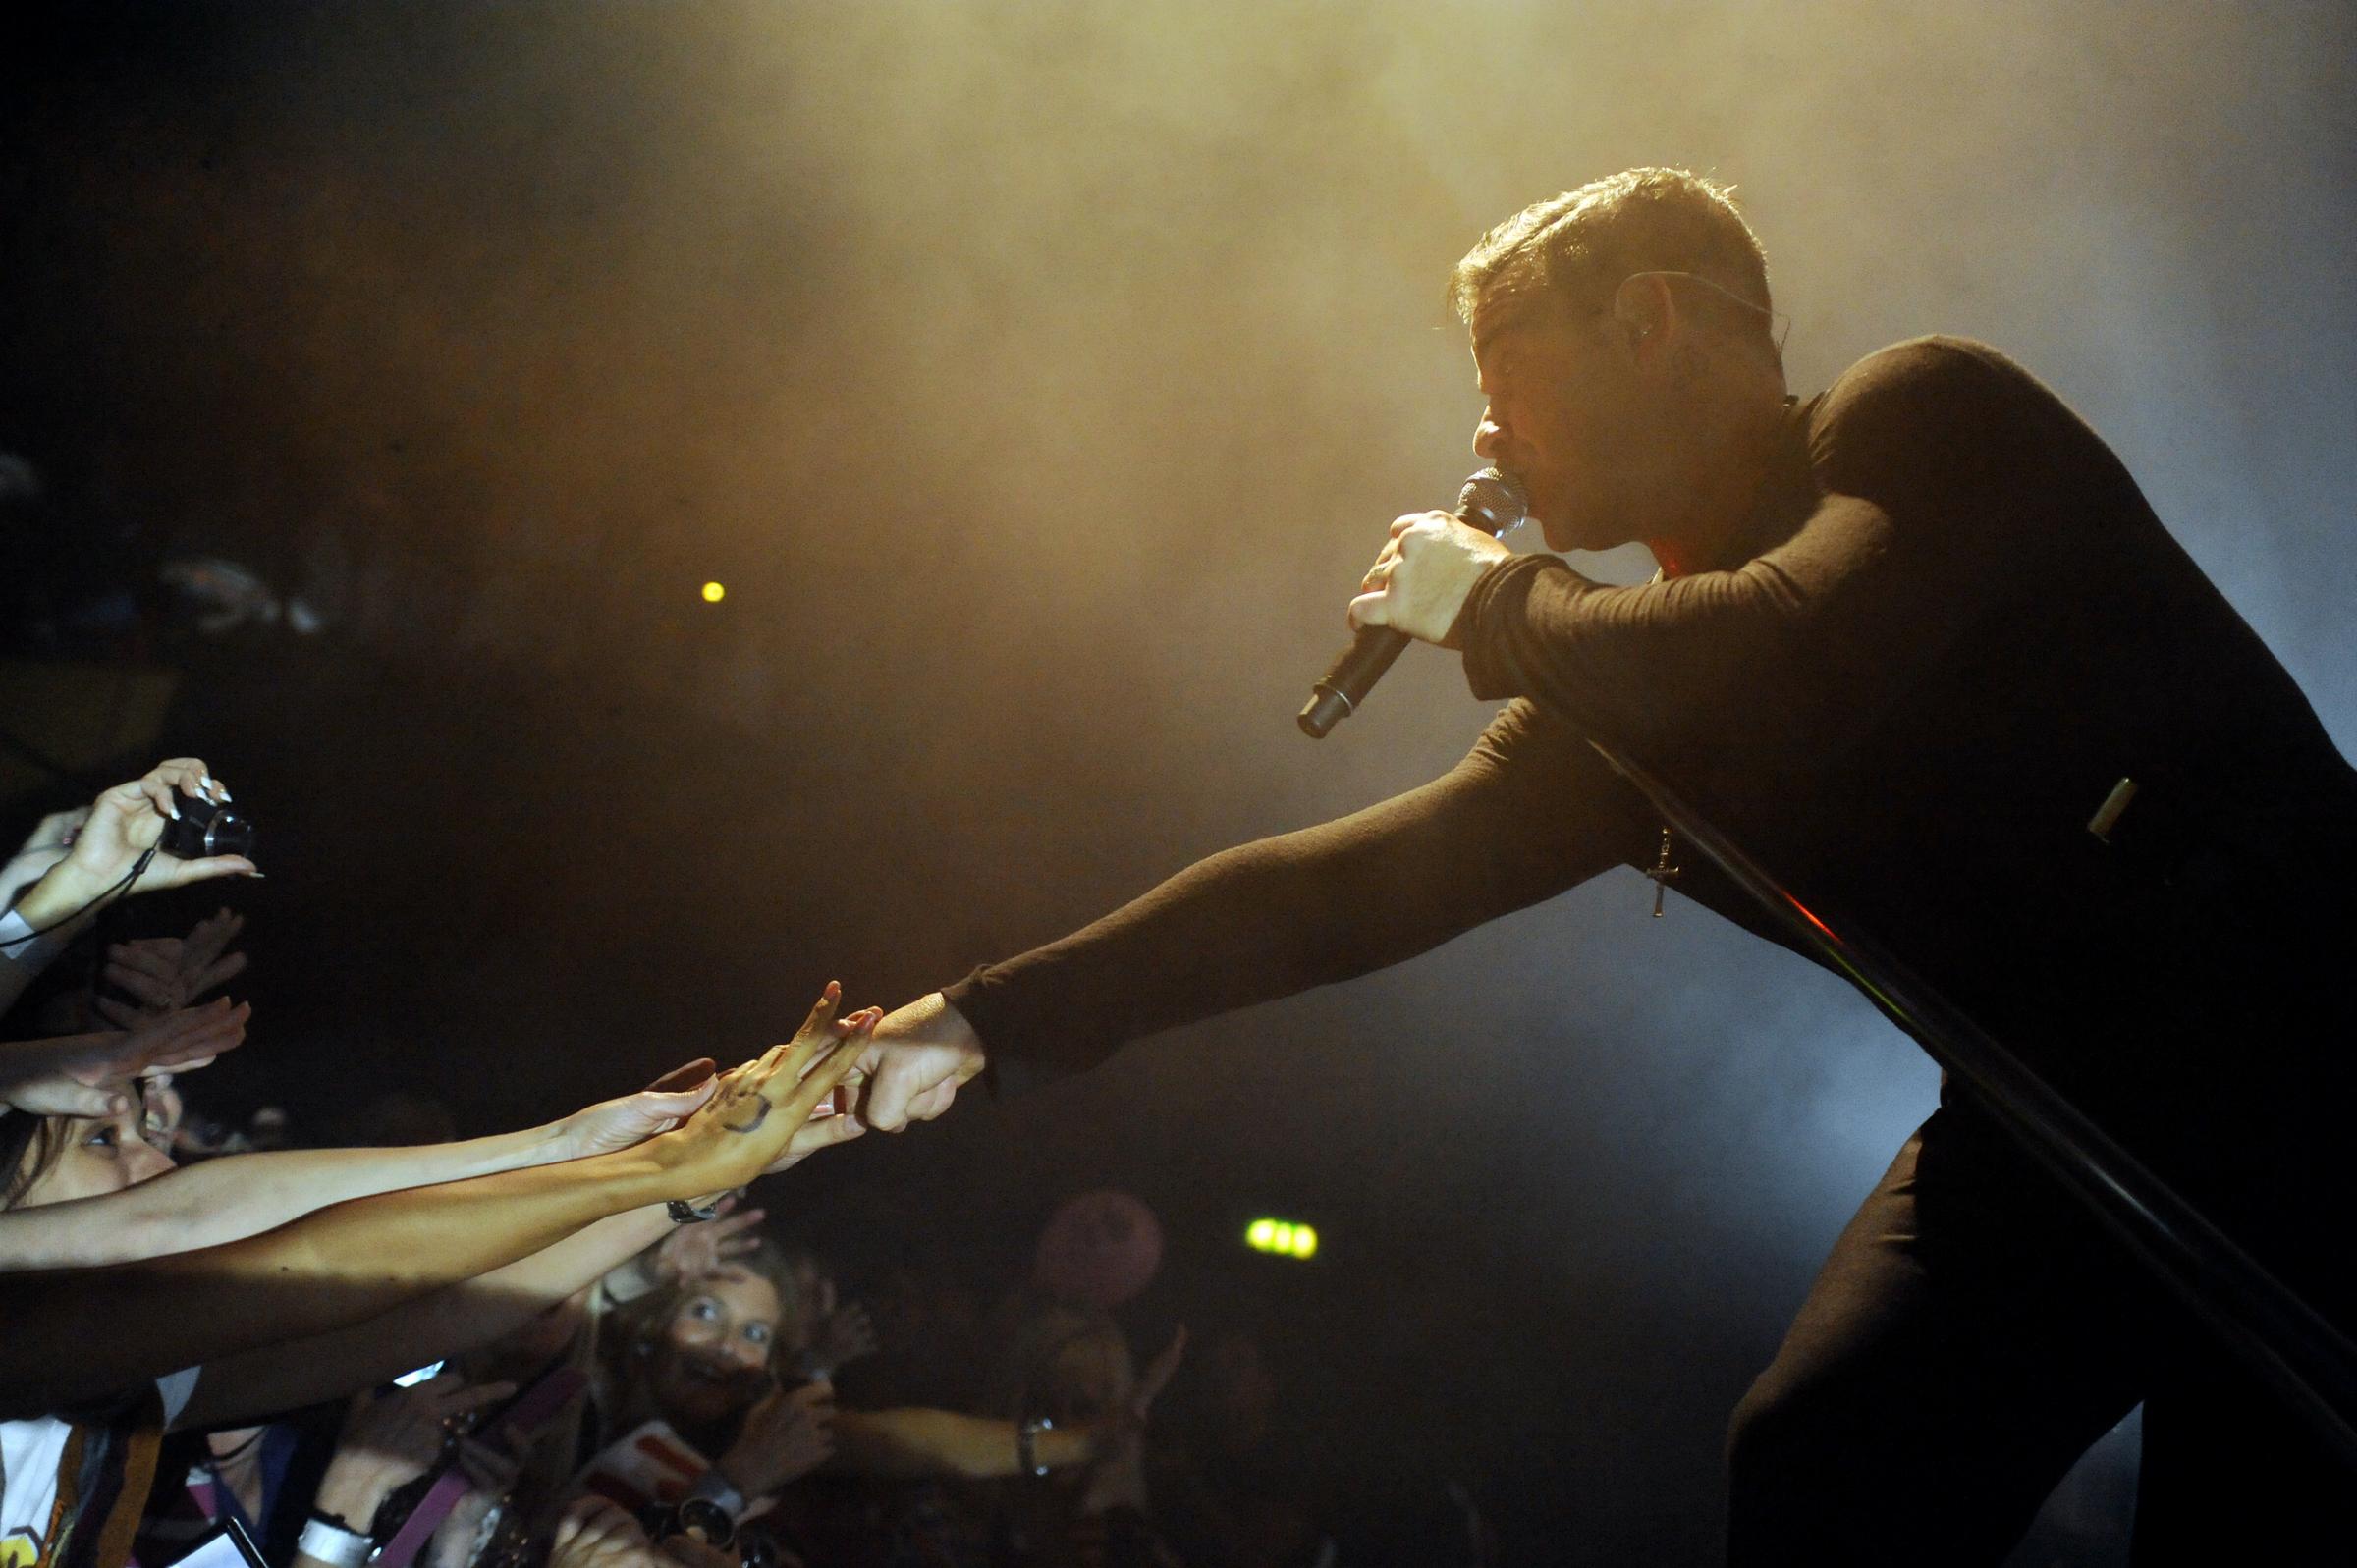 Reaching out - Robbie Williams mingles with his fans during a concert held at the Cliffs Pavilion in 2012